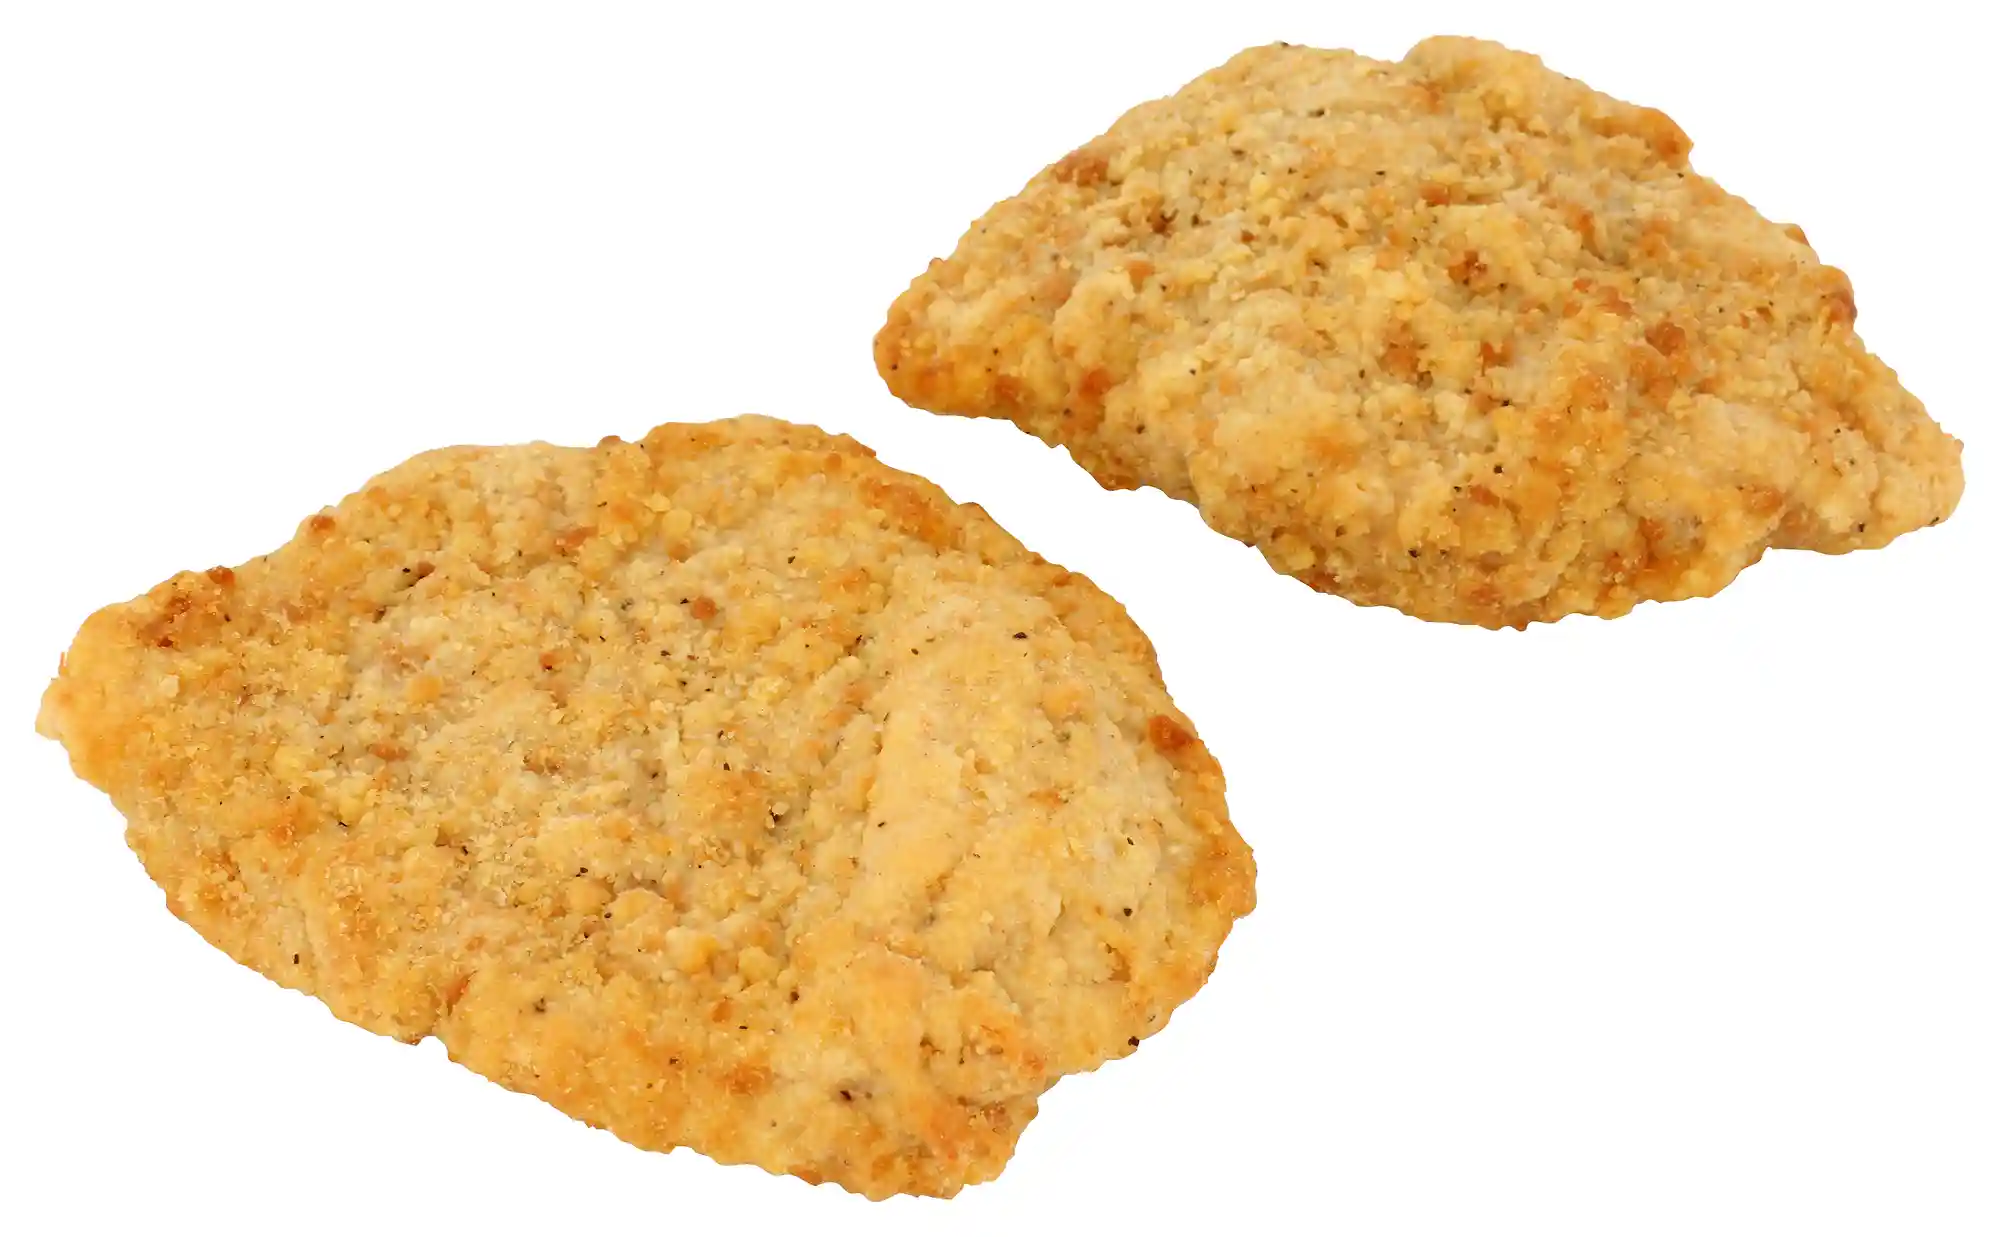 Tyson® Fully Cooked Whole Grain Breaded Homestyle Chicken Breast Filets, 4 oz. _image_01